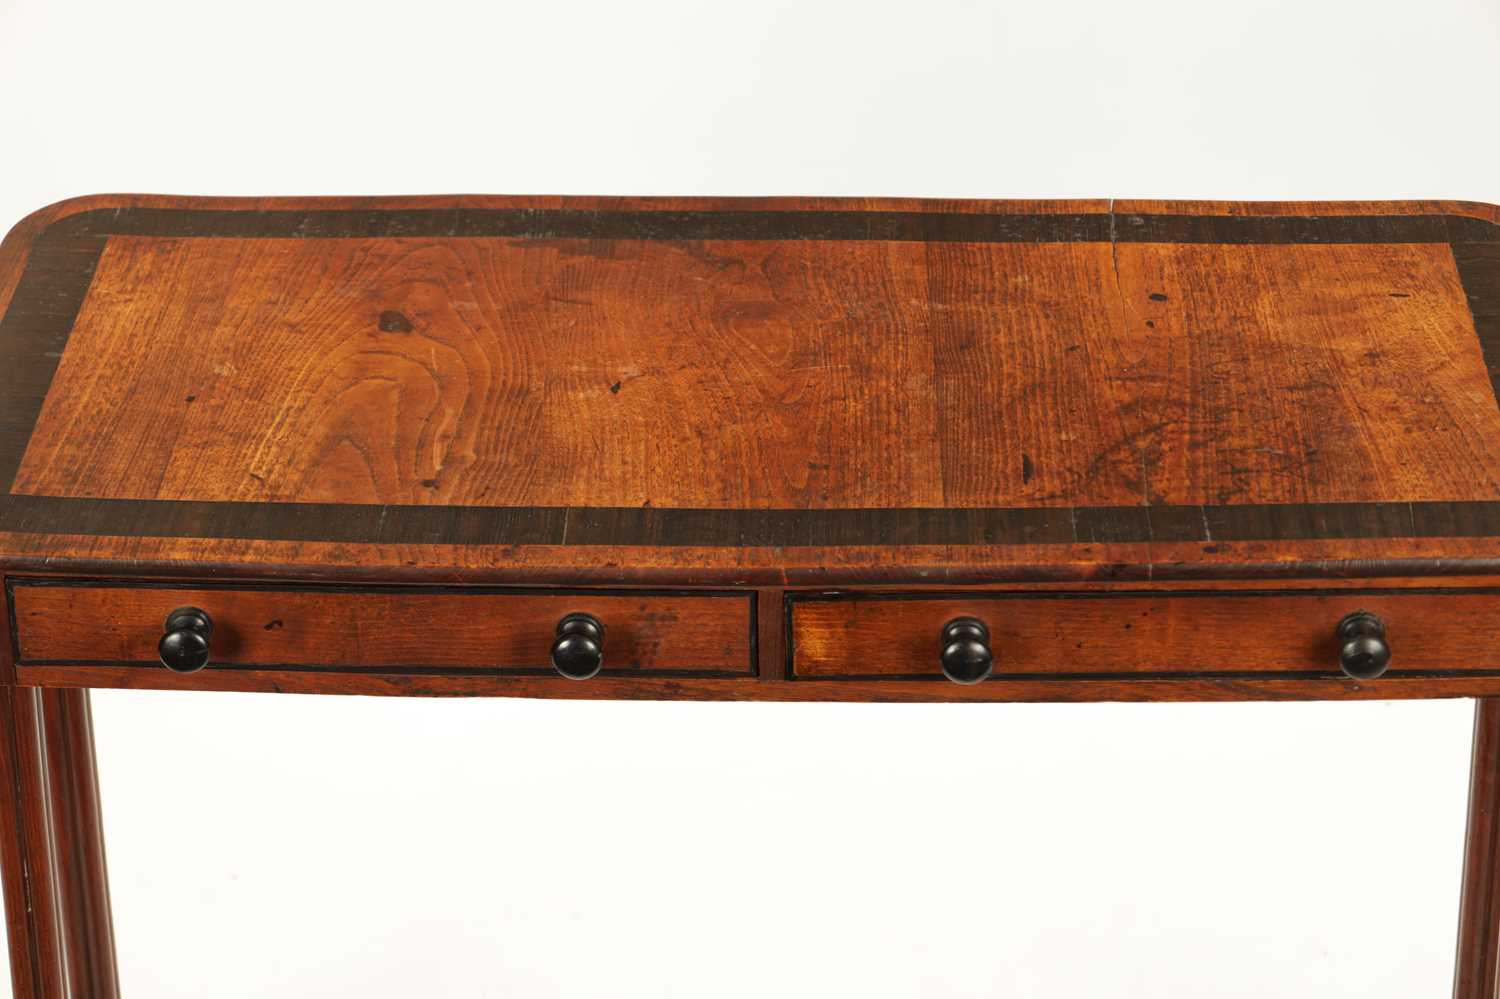 A RARE CANADIAN REGENCY PERIOD ASH AND COROMANDEL SIDE TABLE - Image 5 of 9